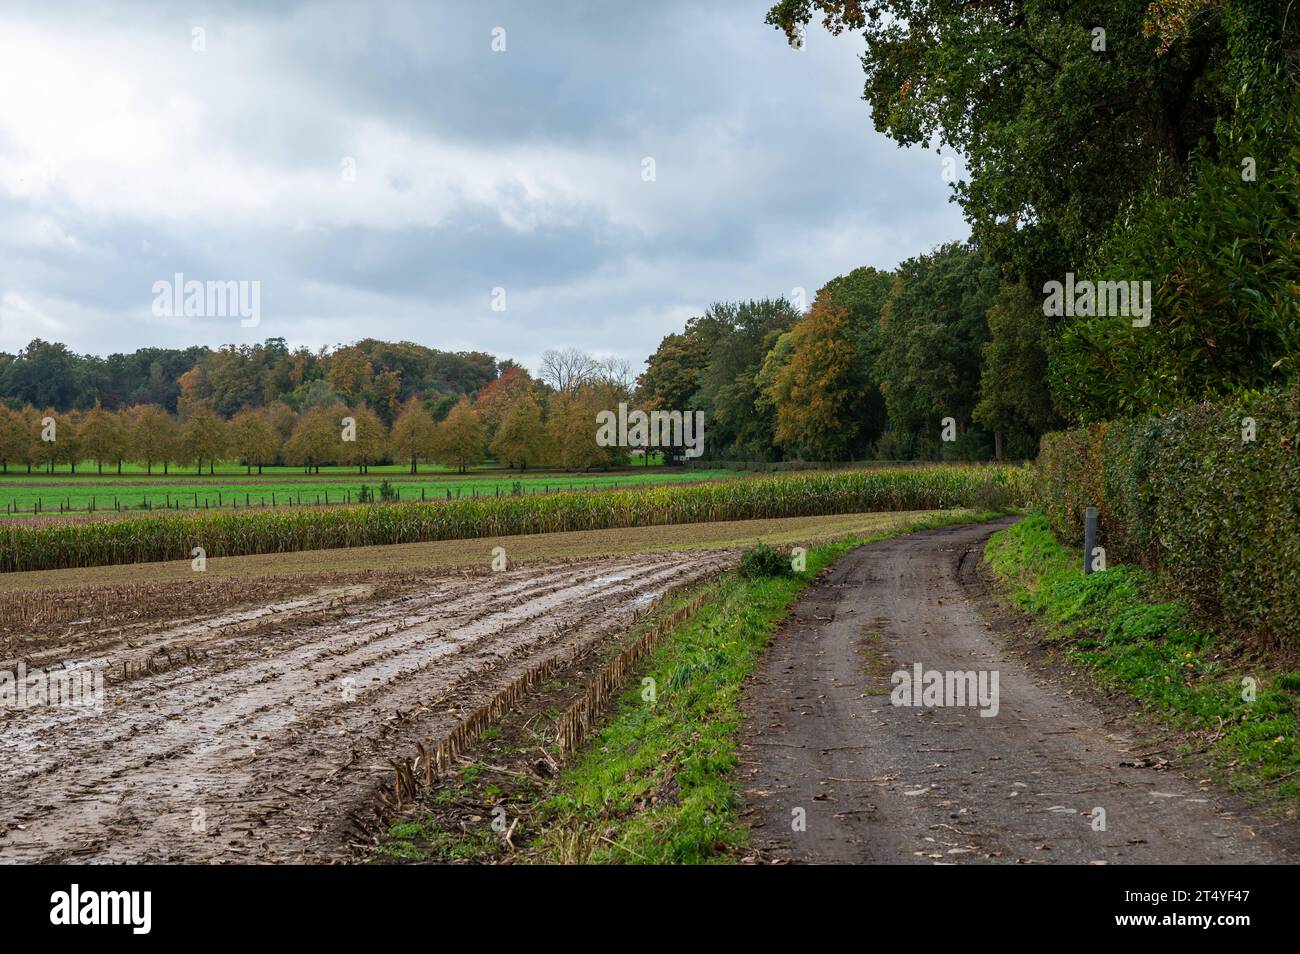 Harvested agriculture field and dirty walking path at the Pajottenland, Lennik, Belgium Credit: Imago/Alamy Live News Stock Photo